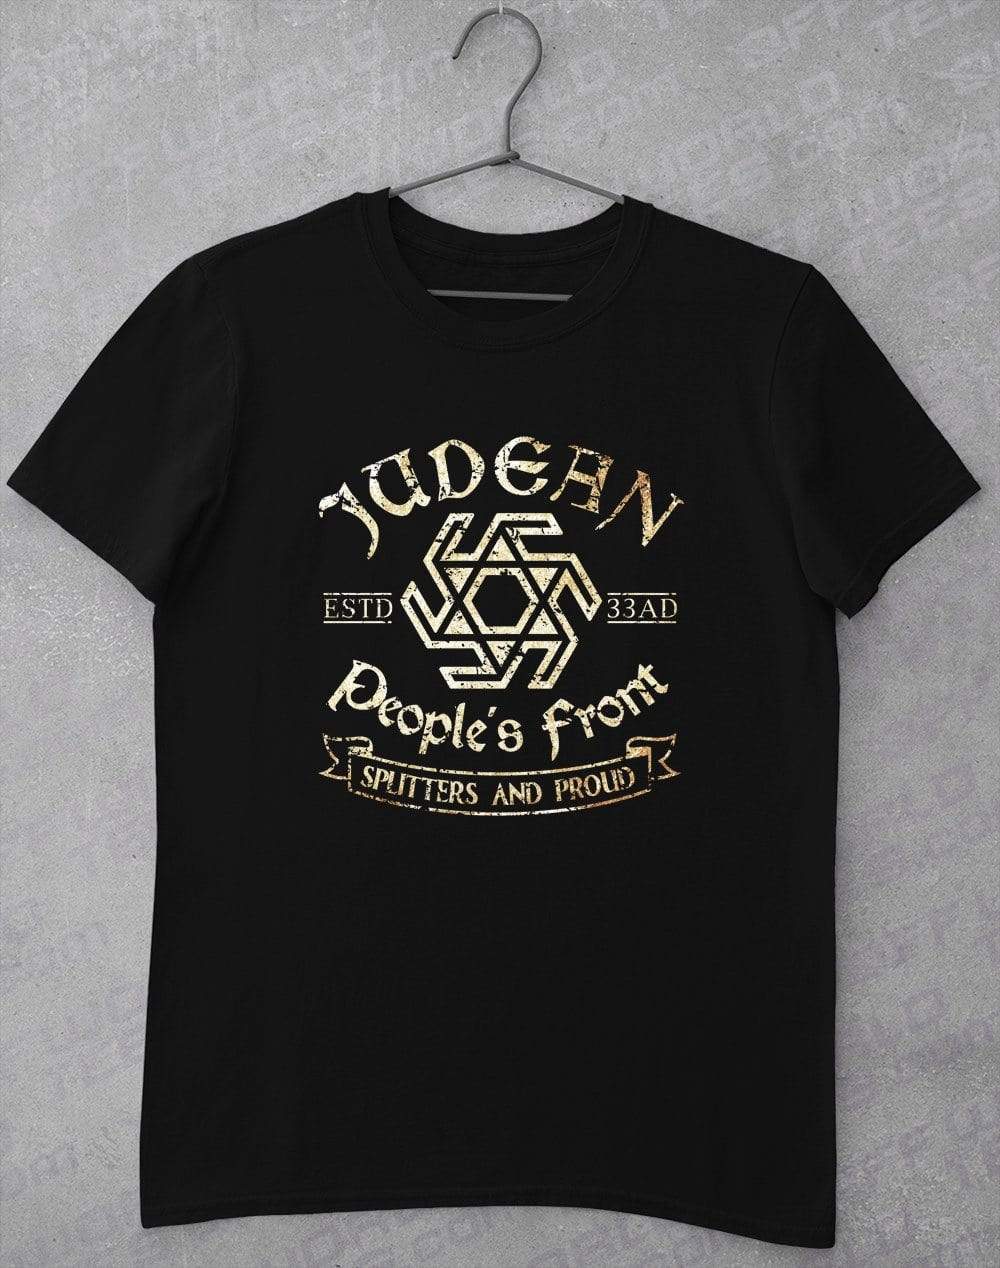 Judean People's Front T Shirt S / Black  - Off World Tees